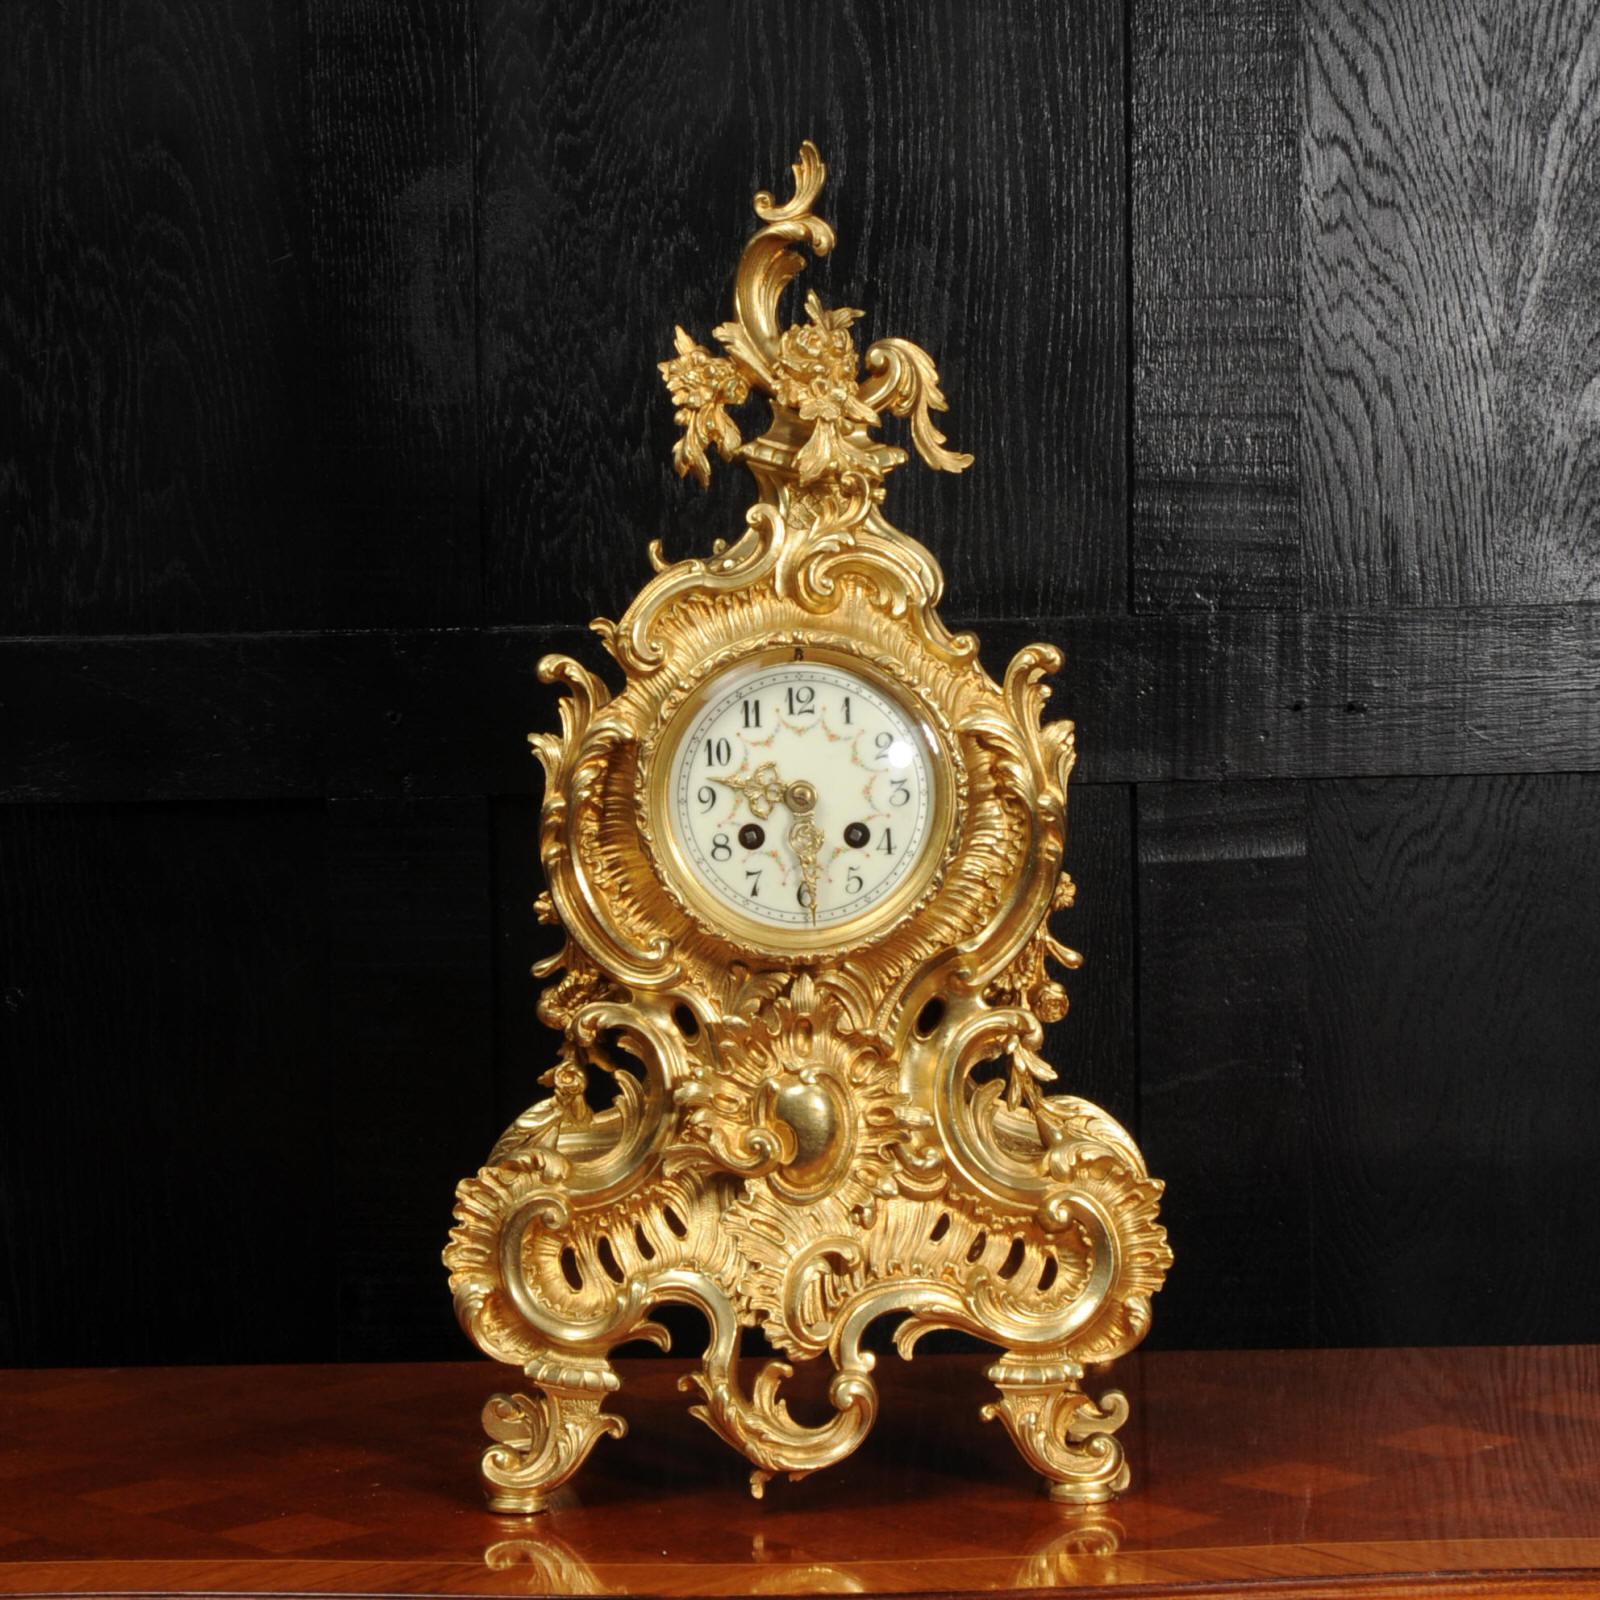 A large, superb and very decorative original antique French clock by the famous maker Japy Frères, circa 1880. It is boldly modelled in the Rococo style in finely gilded bronze. Asymmetric waisted case, decorated profusely with acanthus leaves and